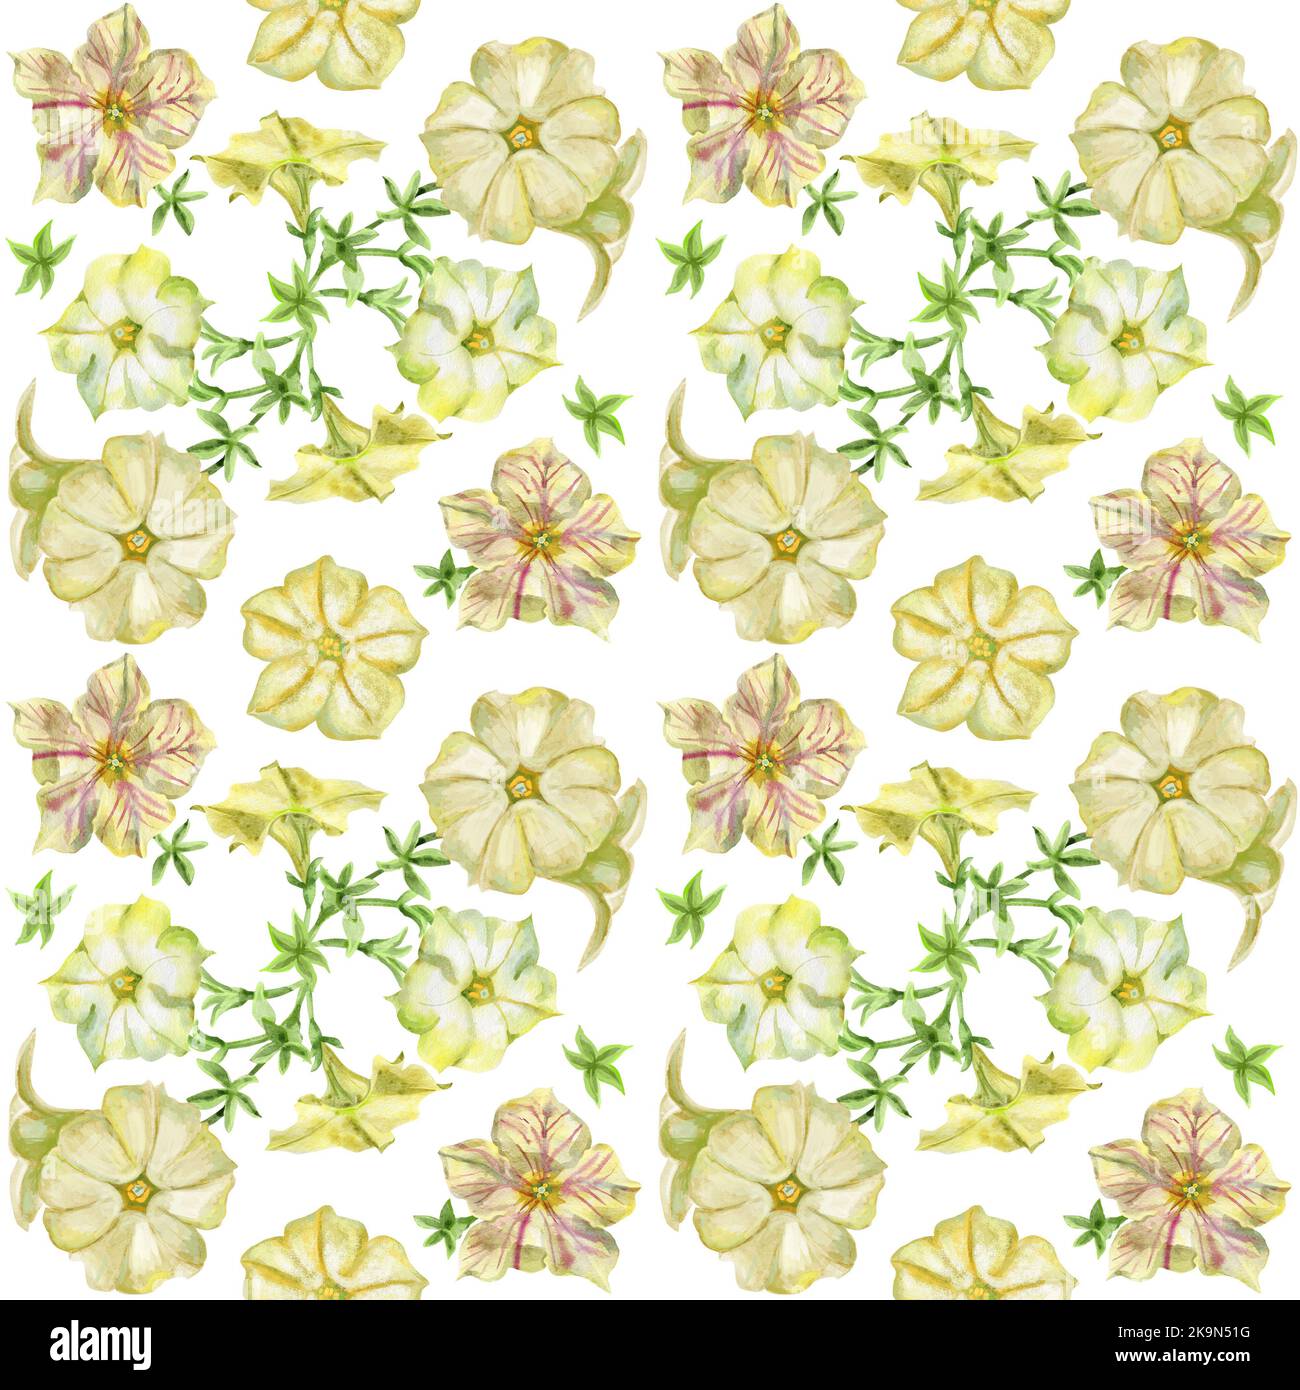 Seamless pattern with petunia flowers, design element. Floral composition can be used for wedding, baby shower, mothers day, valentines day cards, inv Stock Photo